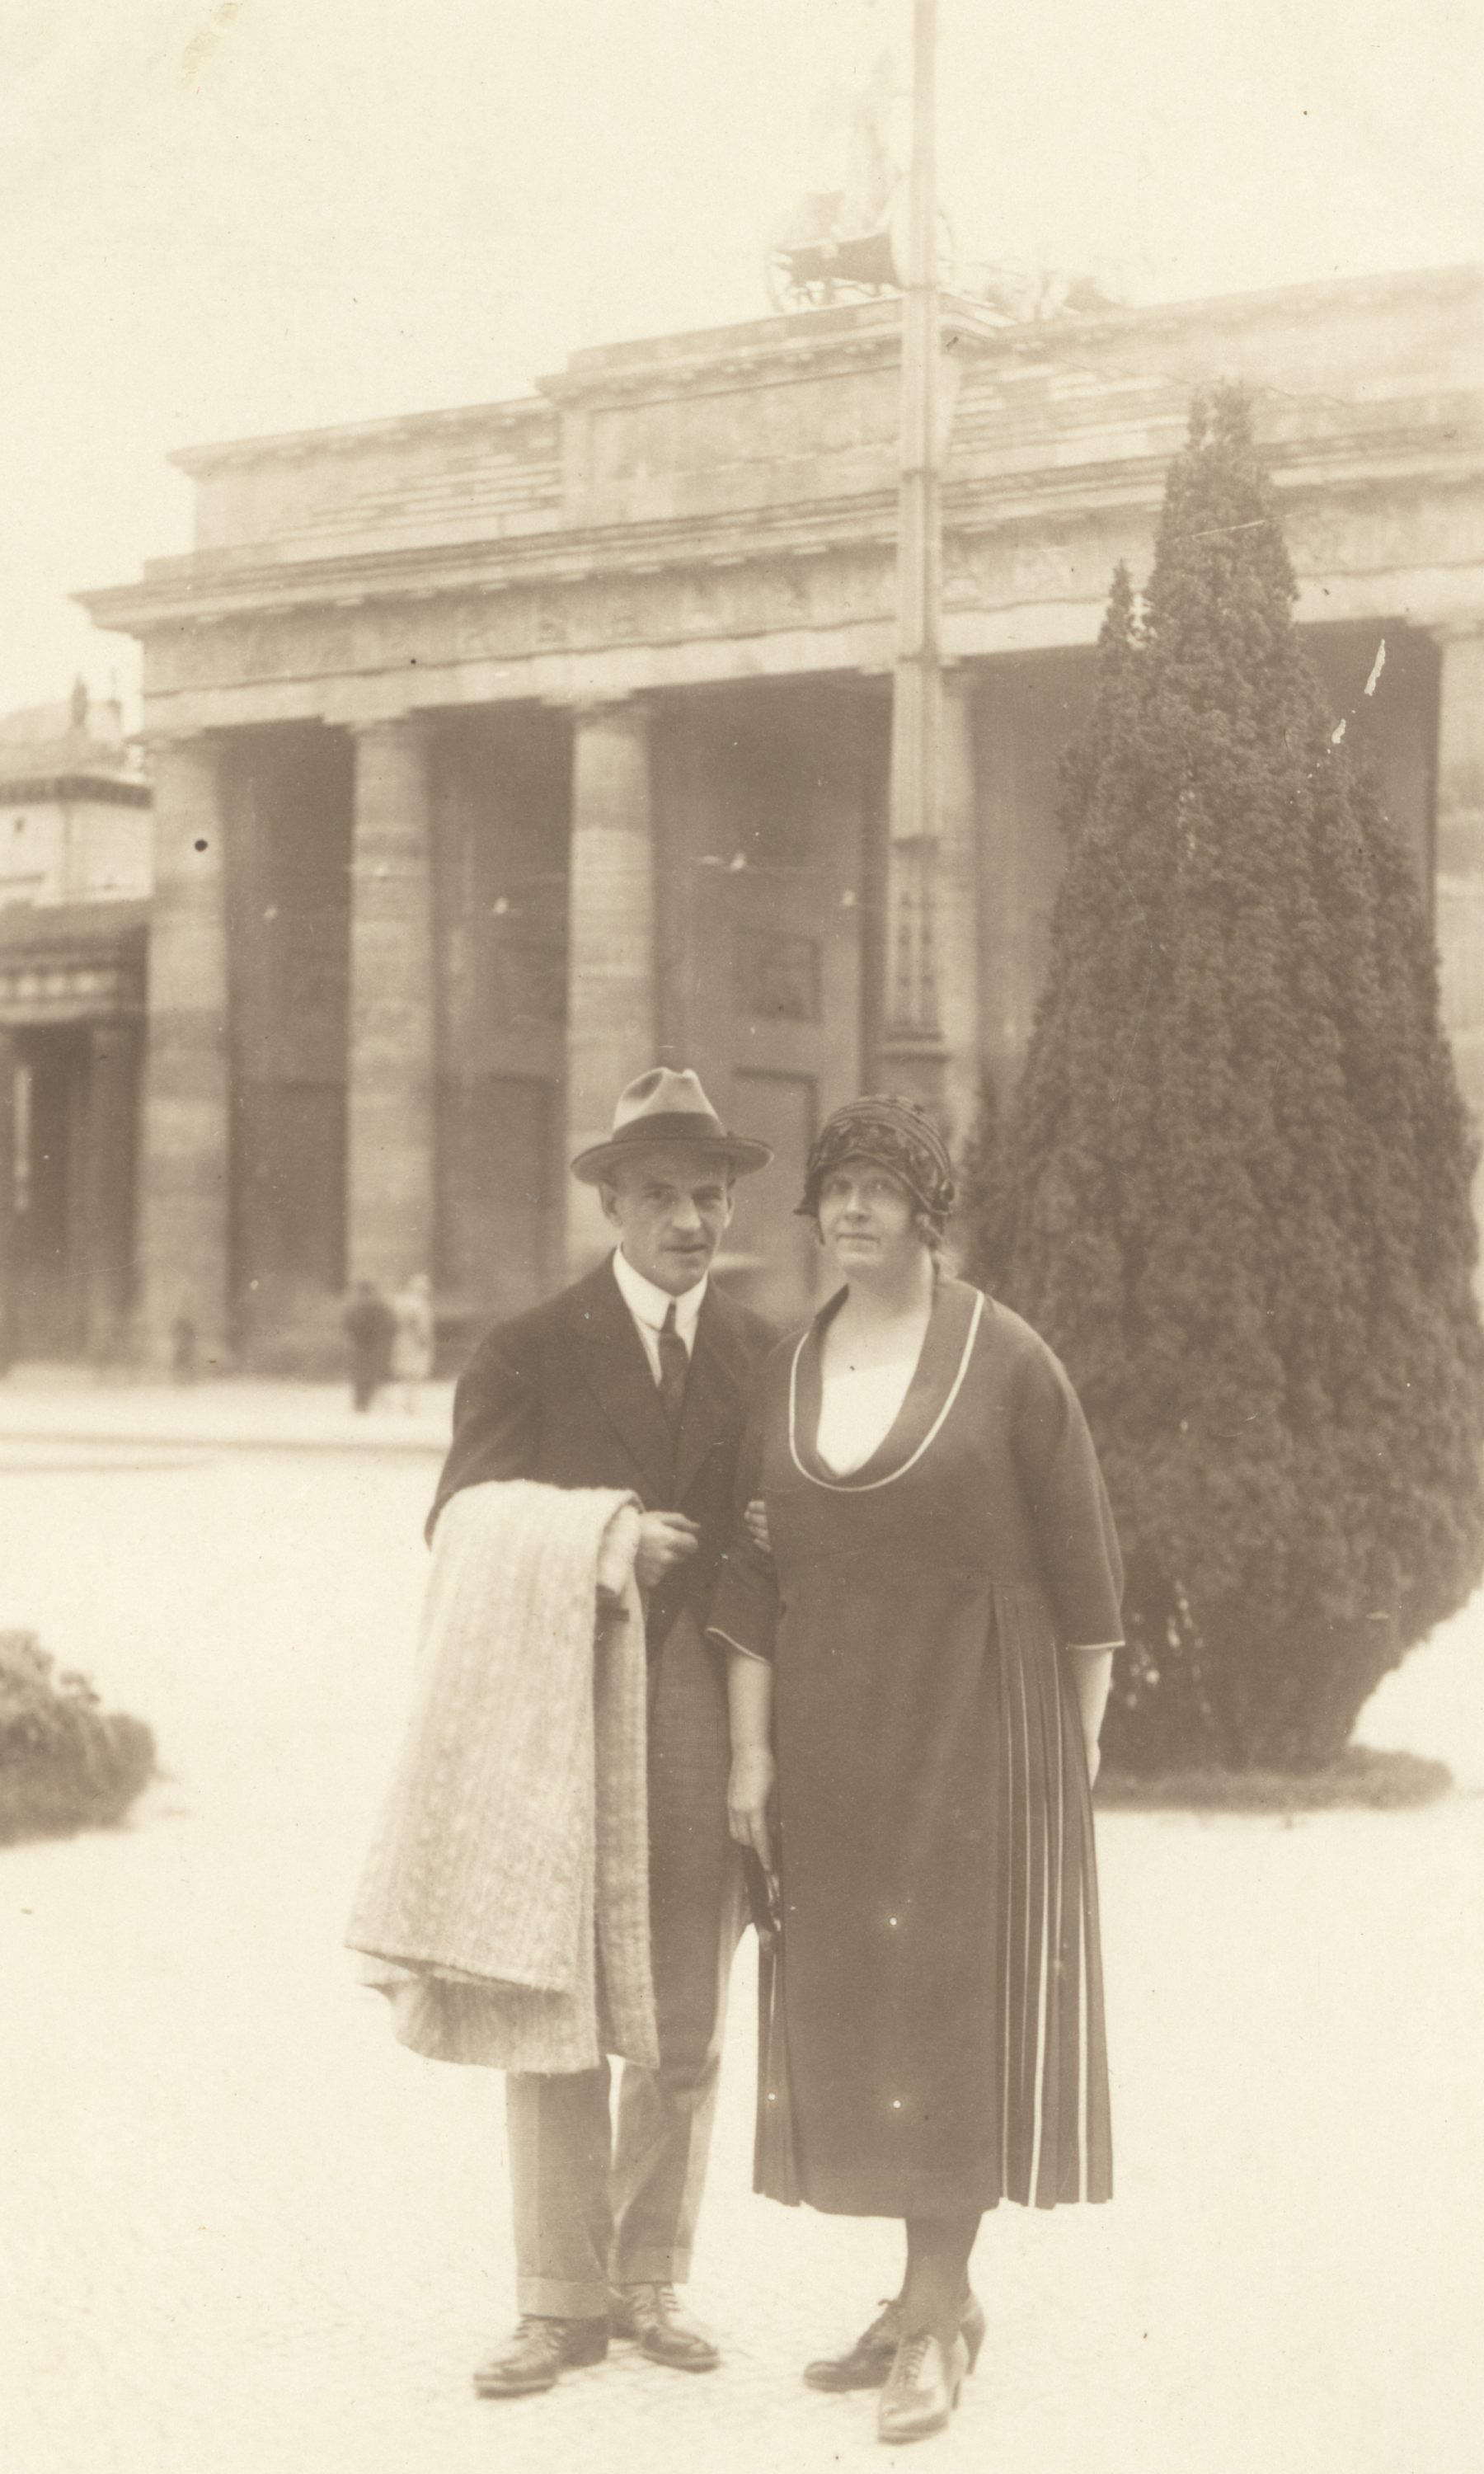 Artur Adson and Marie Under in Berlin 1921